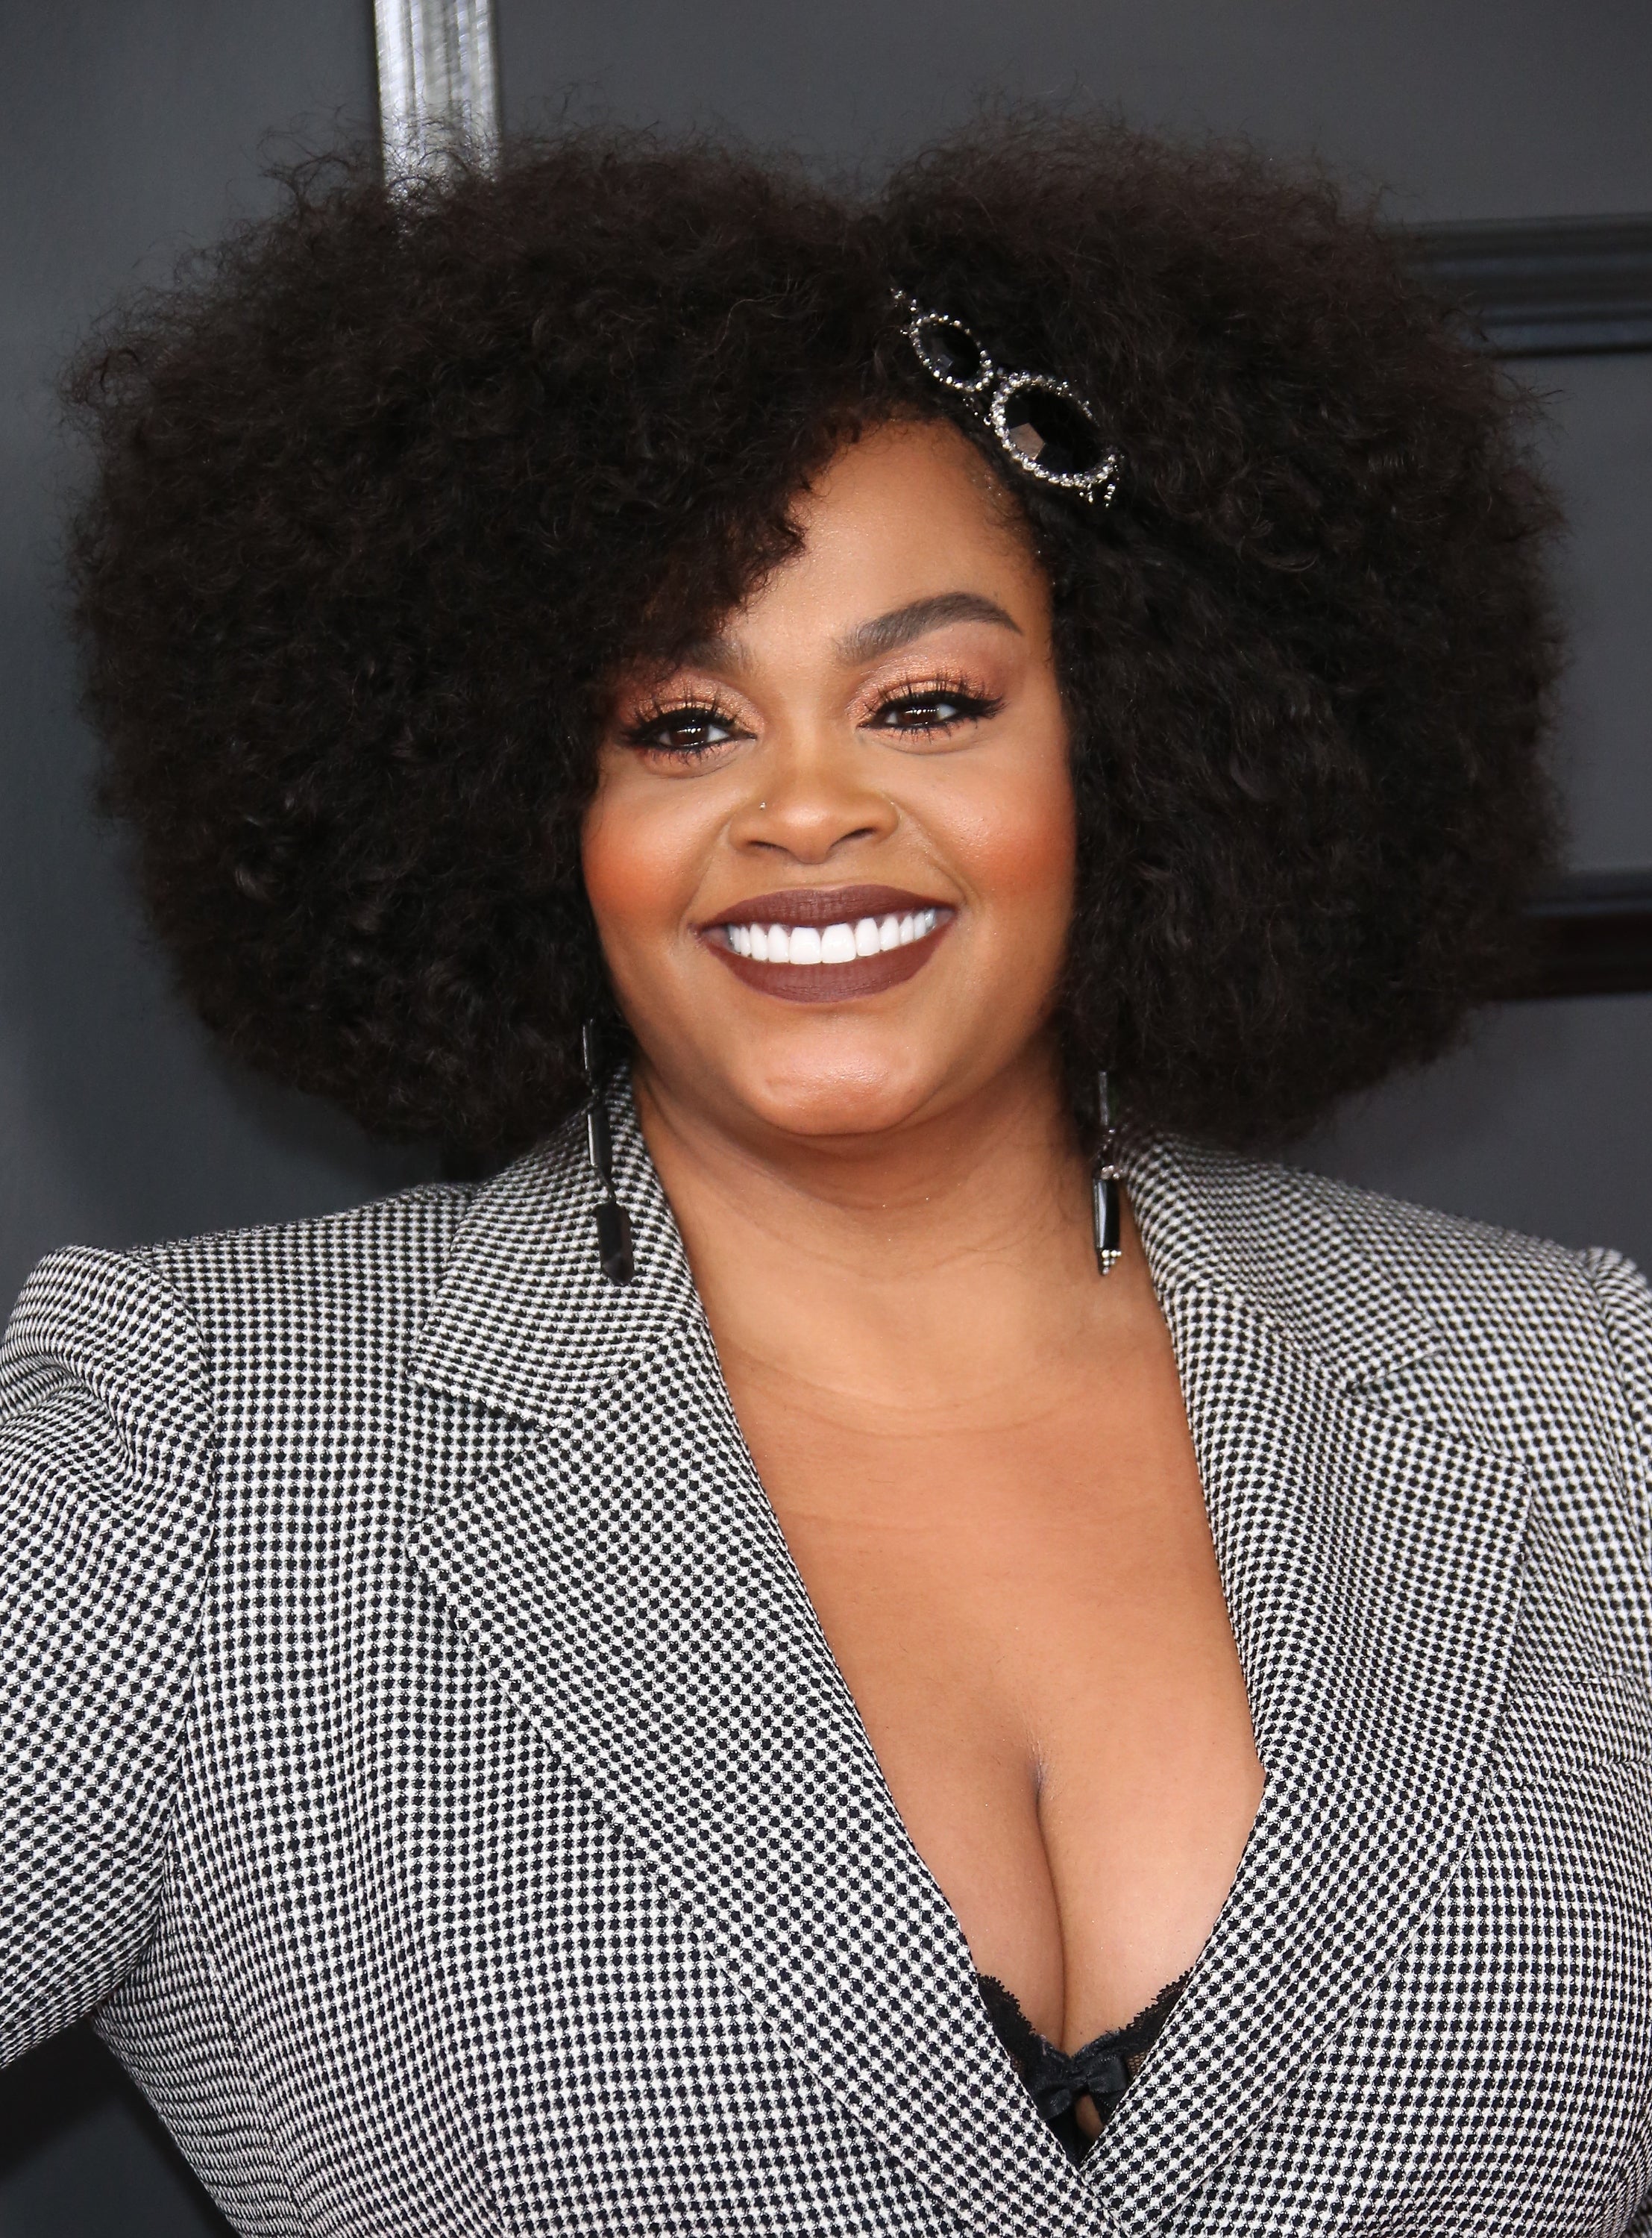 Fighting Words: This French Actress Said Her Dog Looks Like Jill Scott
